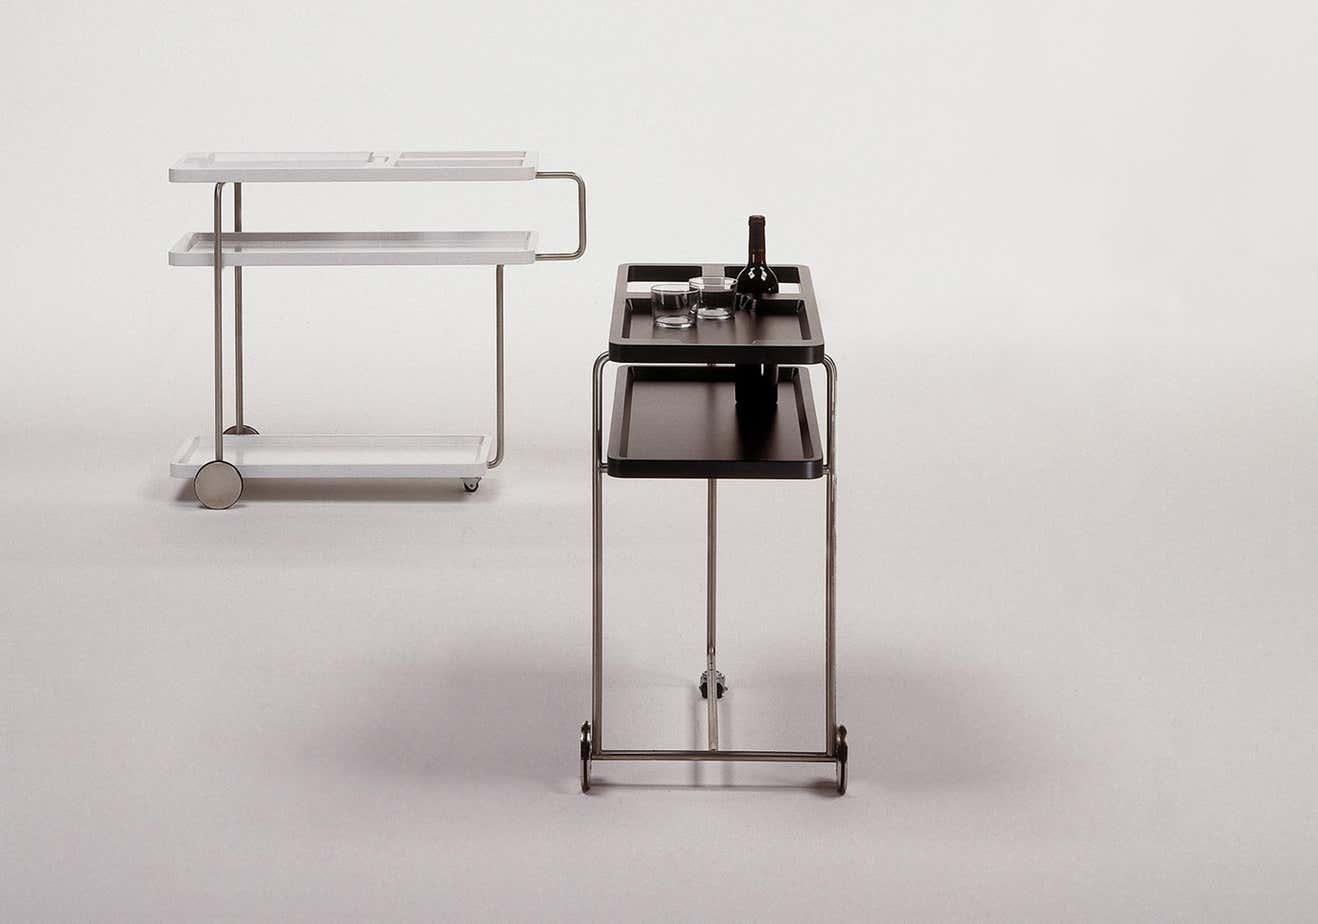 Black cocktail serving bar trolley chromed finish

Materials: 
Iron, plastic

Dimensions: 
D 43 cm x W 91 cm x H 73 cm. 

“Looking for lost ideas with a cup in one hand, there came to mind simple solutions with little details of invention,